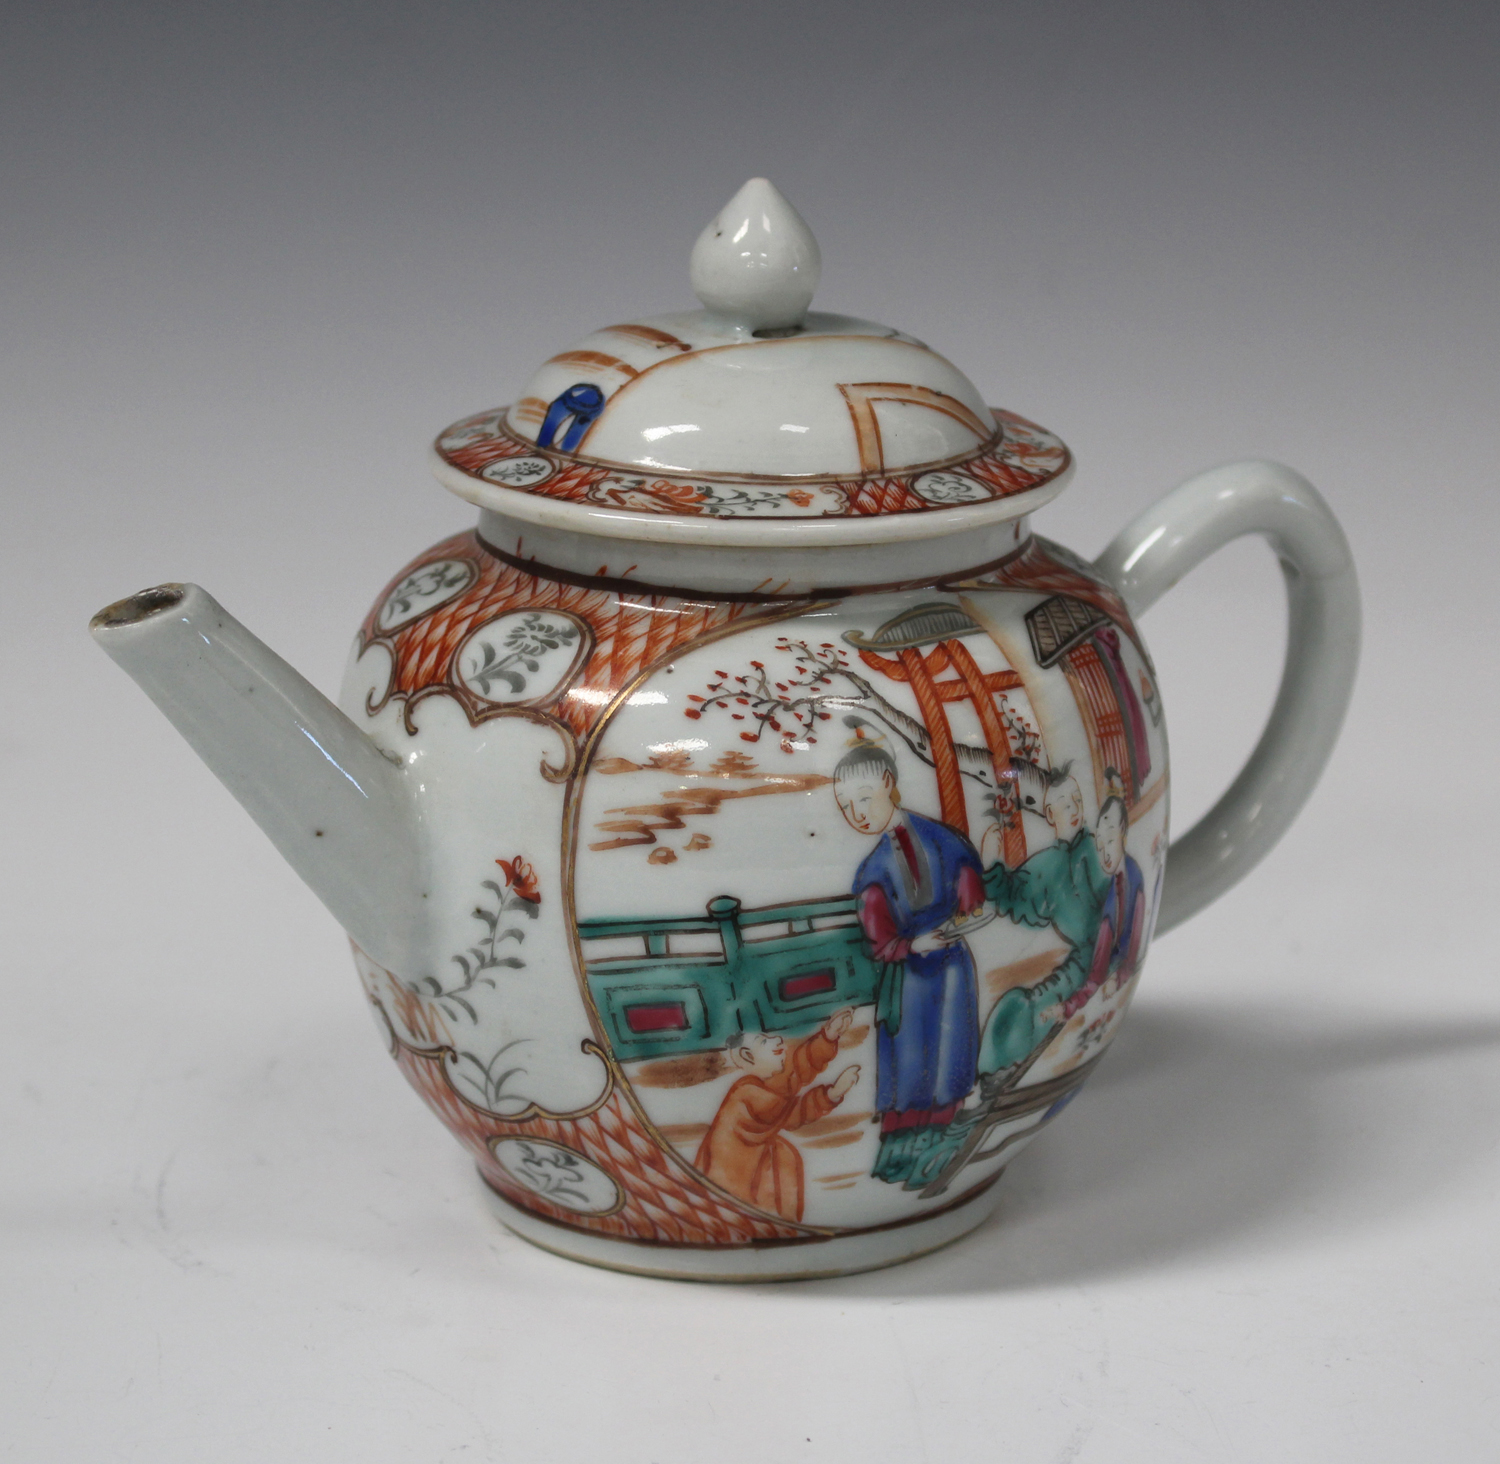 A Chinese famille rose export porcelain globular teapot and domed cover, Qianlong period, painted